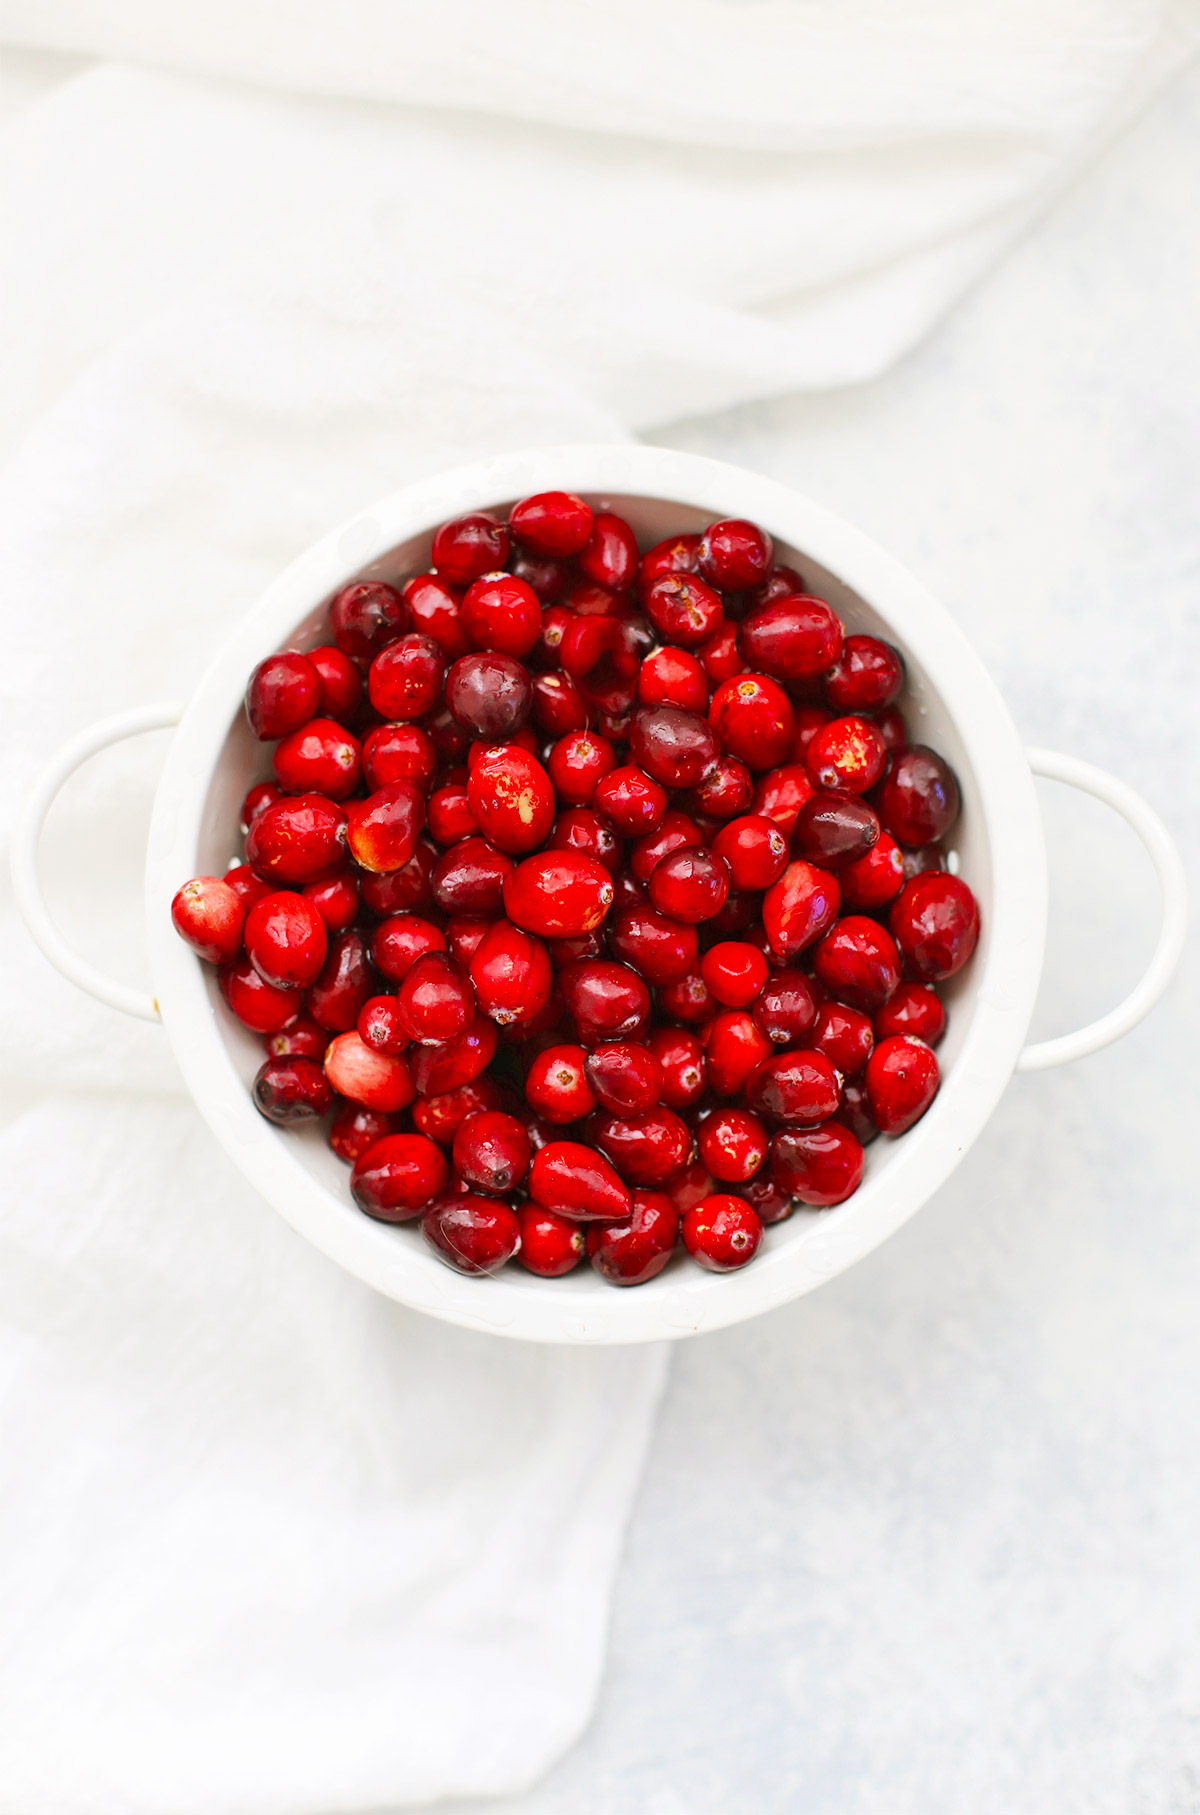 Overhead view of a white colander full of fresh cranberries